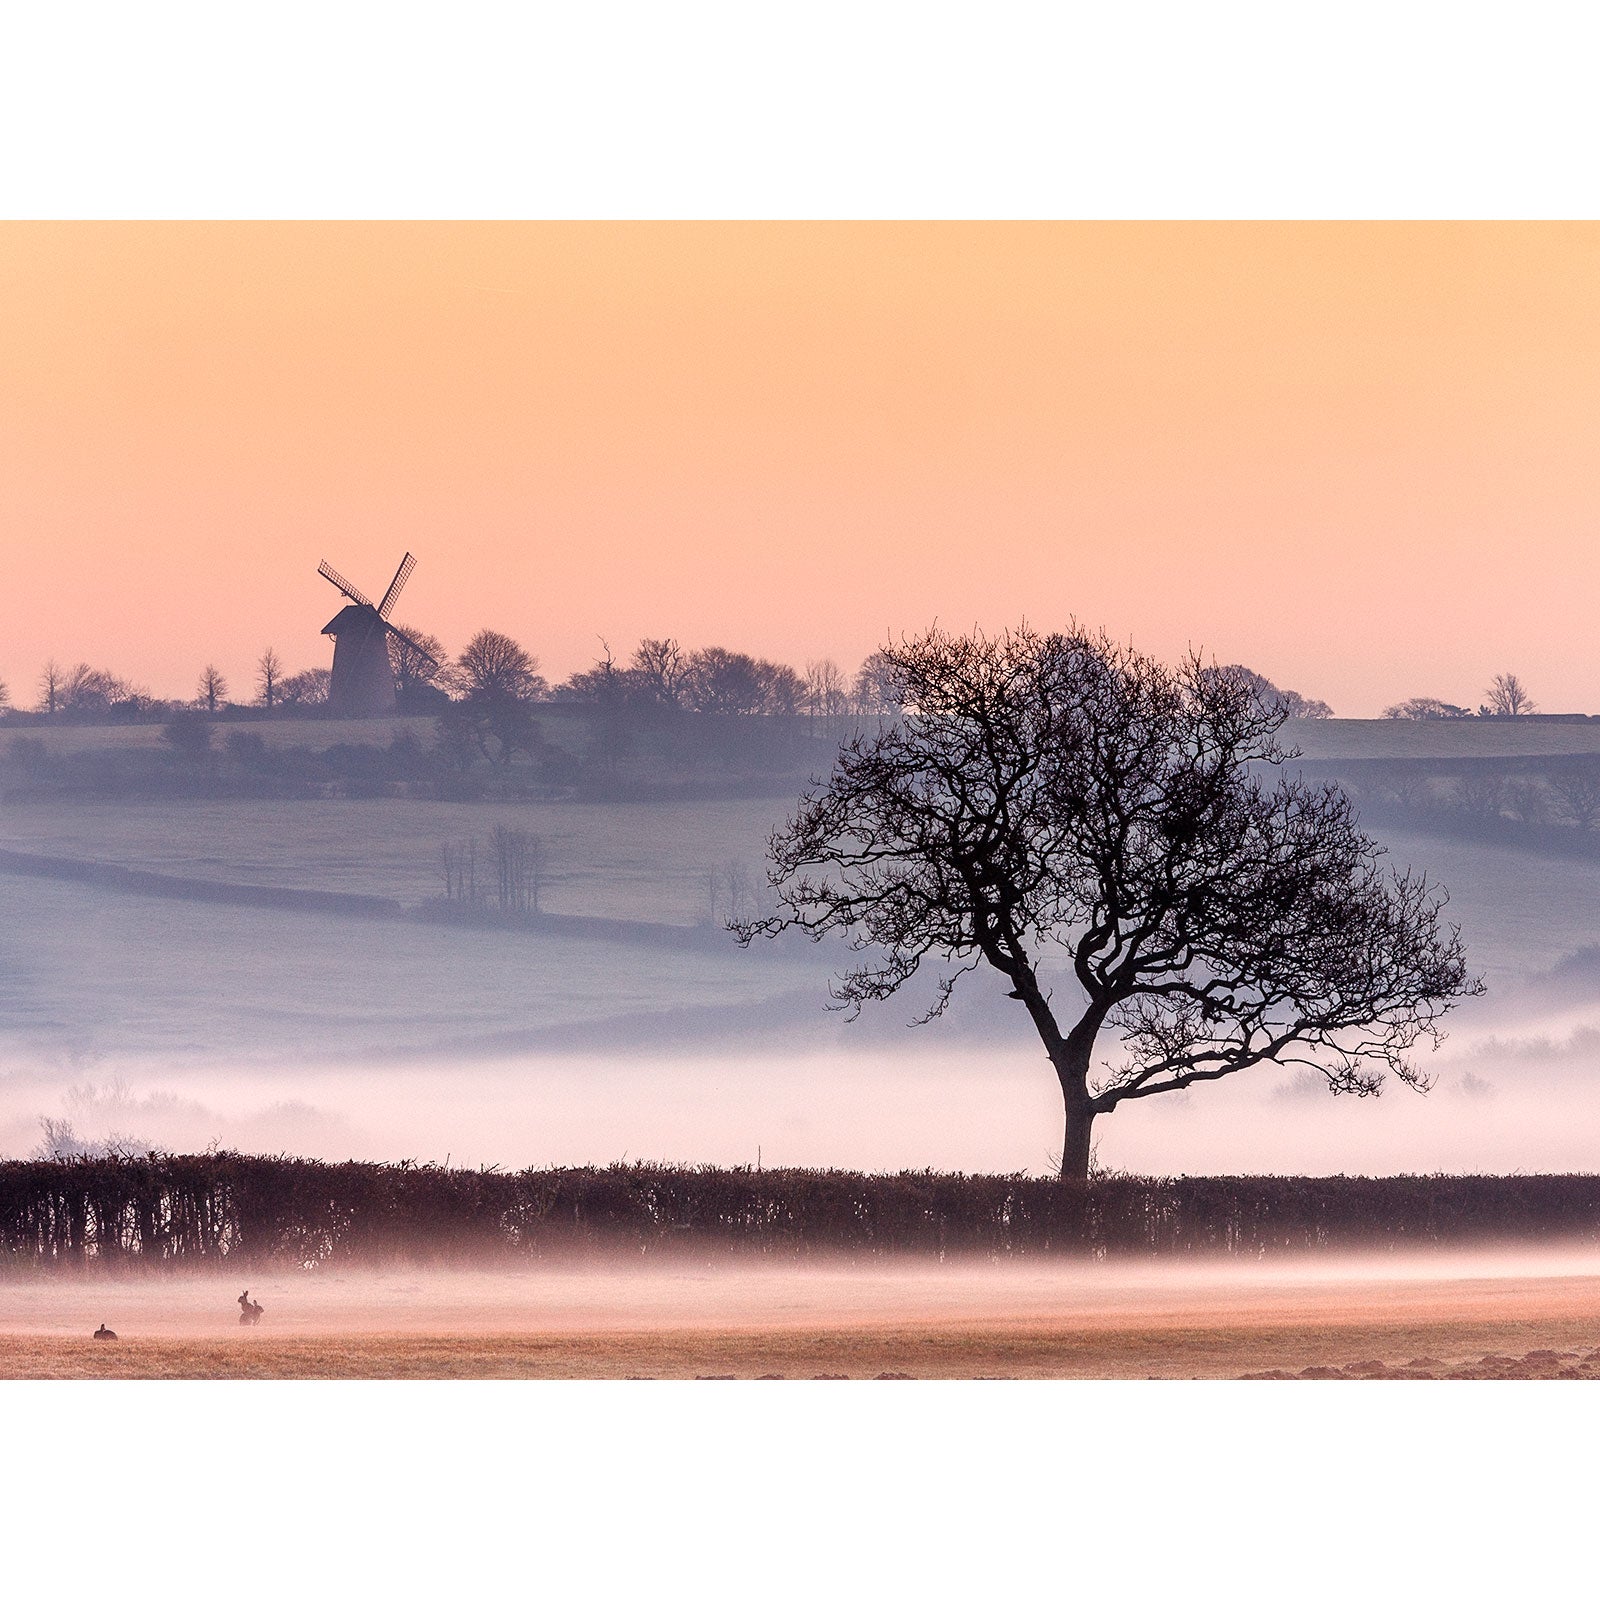 Misty sunrise with a silhouette of a lone tree and the Bembridge Windmill in the countryside by Available Light Photography.